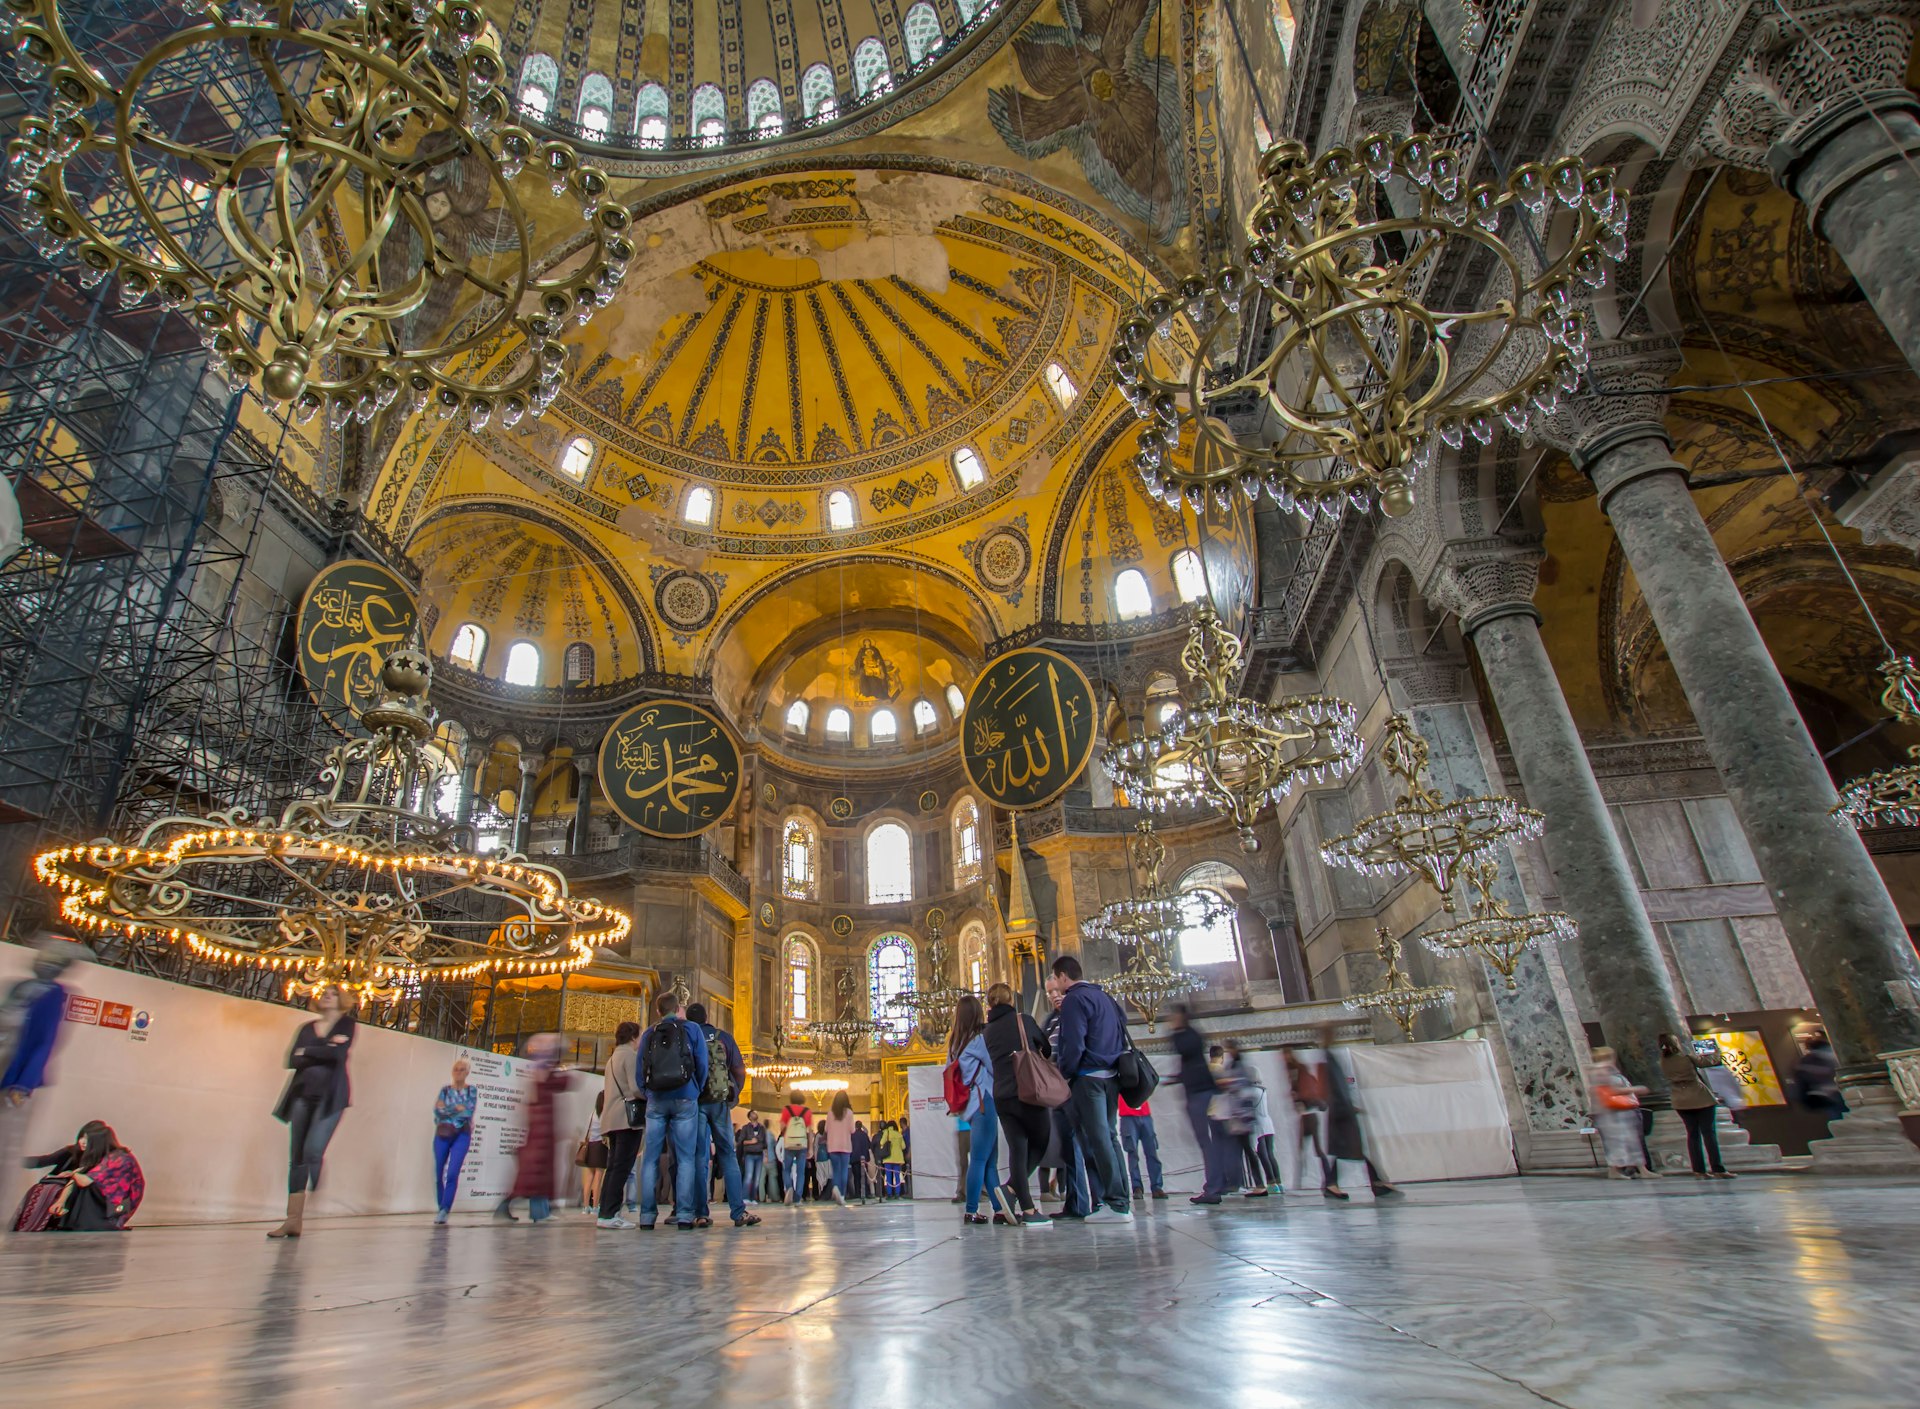 An interior shot of a grand mosque building, with a huge central golden dome and massive chandeliers hanging down from the ceiling